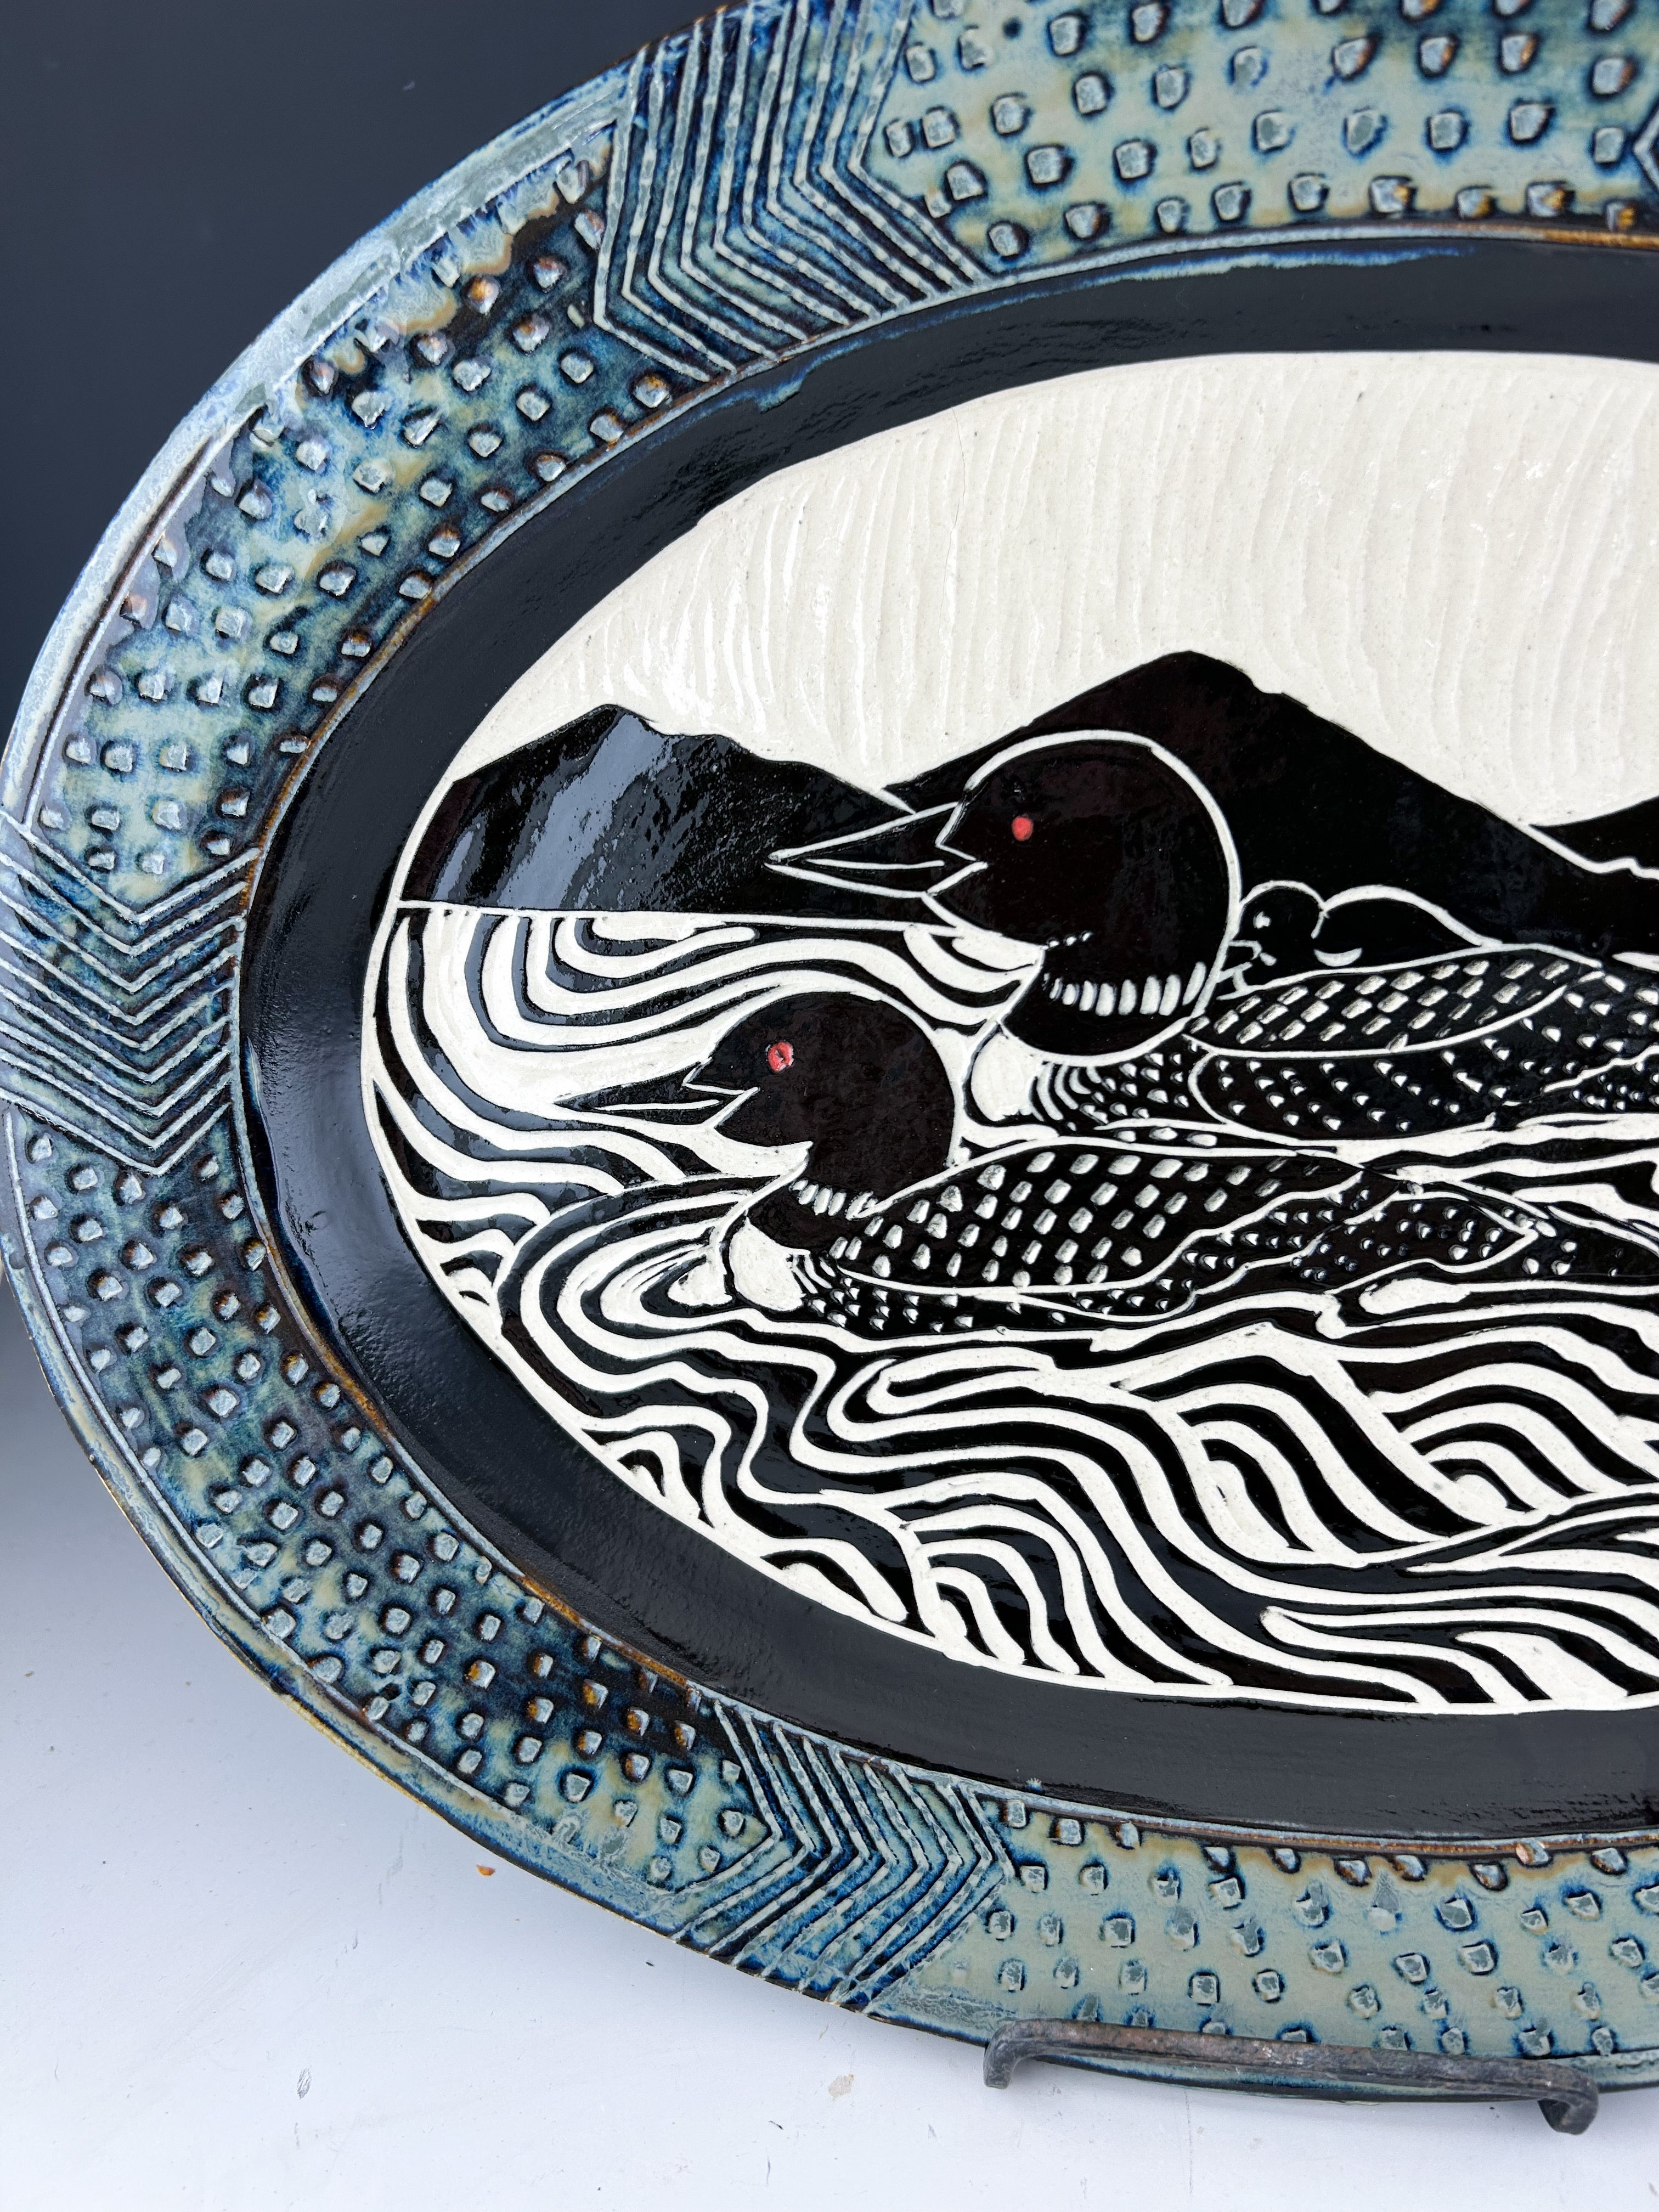 Loon Large Serving Platter in Gray